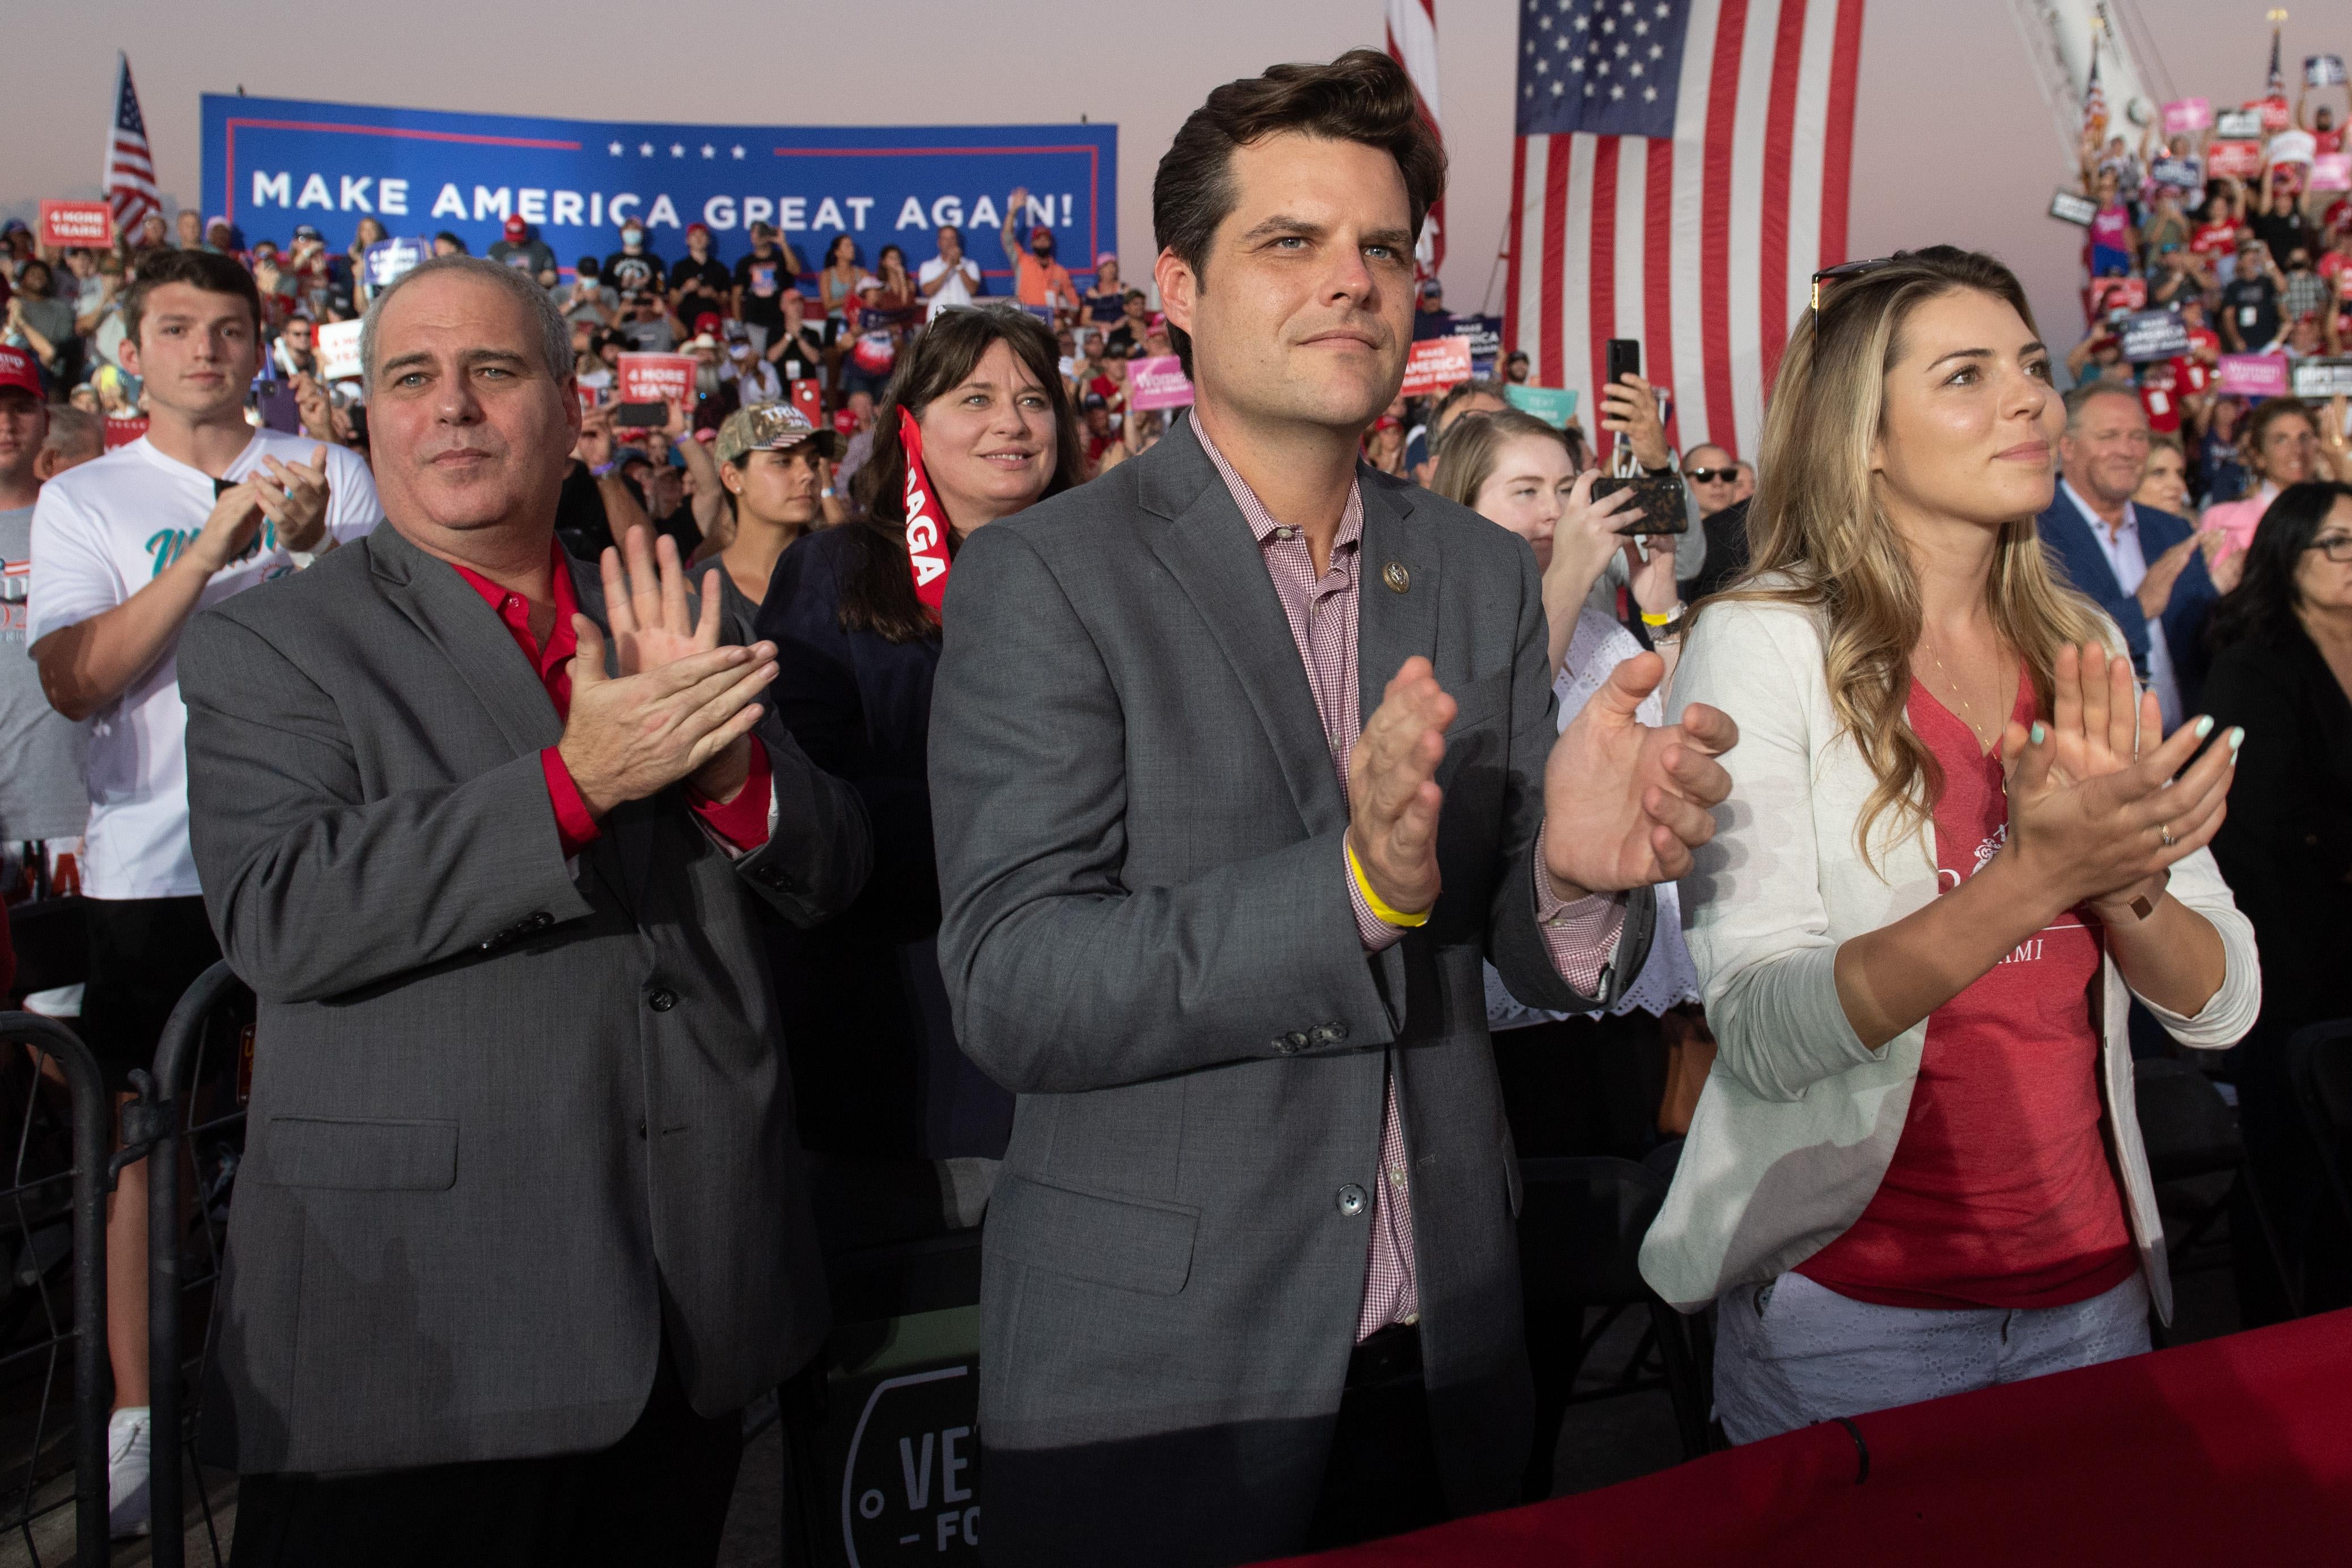 US Representative Matt Gaetz (C), Republican of Florida, applauds as US President Donald Trump holds a Make America Great Again rally as he campaigns at Orlando Sanford International Airport in Sanford, Florida, October 12, 2020. (Photo by SAUL LOEB / AFP) (Photo by SAUL LOEB/AFP via Getty Images)